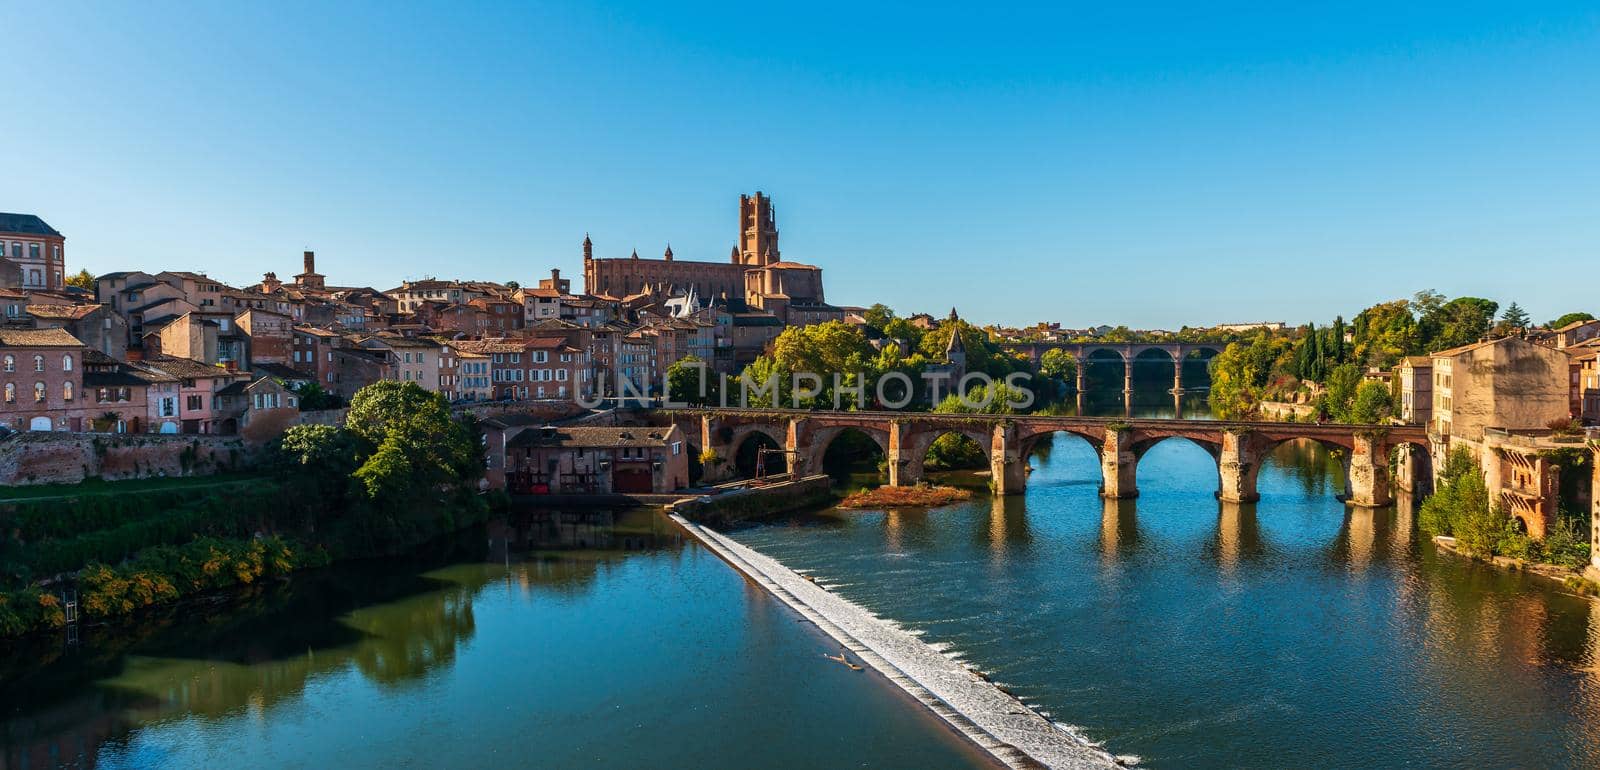 Albi is a commune in the south-west of France, capital of the Tarn department in the Occitanie region and the seat of the archdiocese of Albi, Castres and Lavaur. Historically and culturally, the town is in the Albigensian, a natural agricultural region.